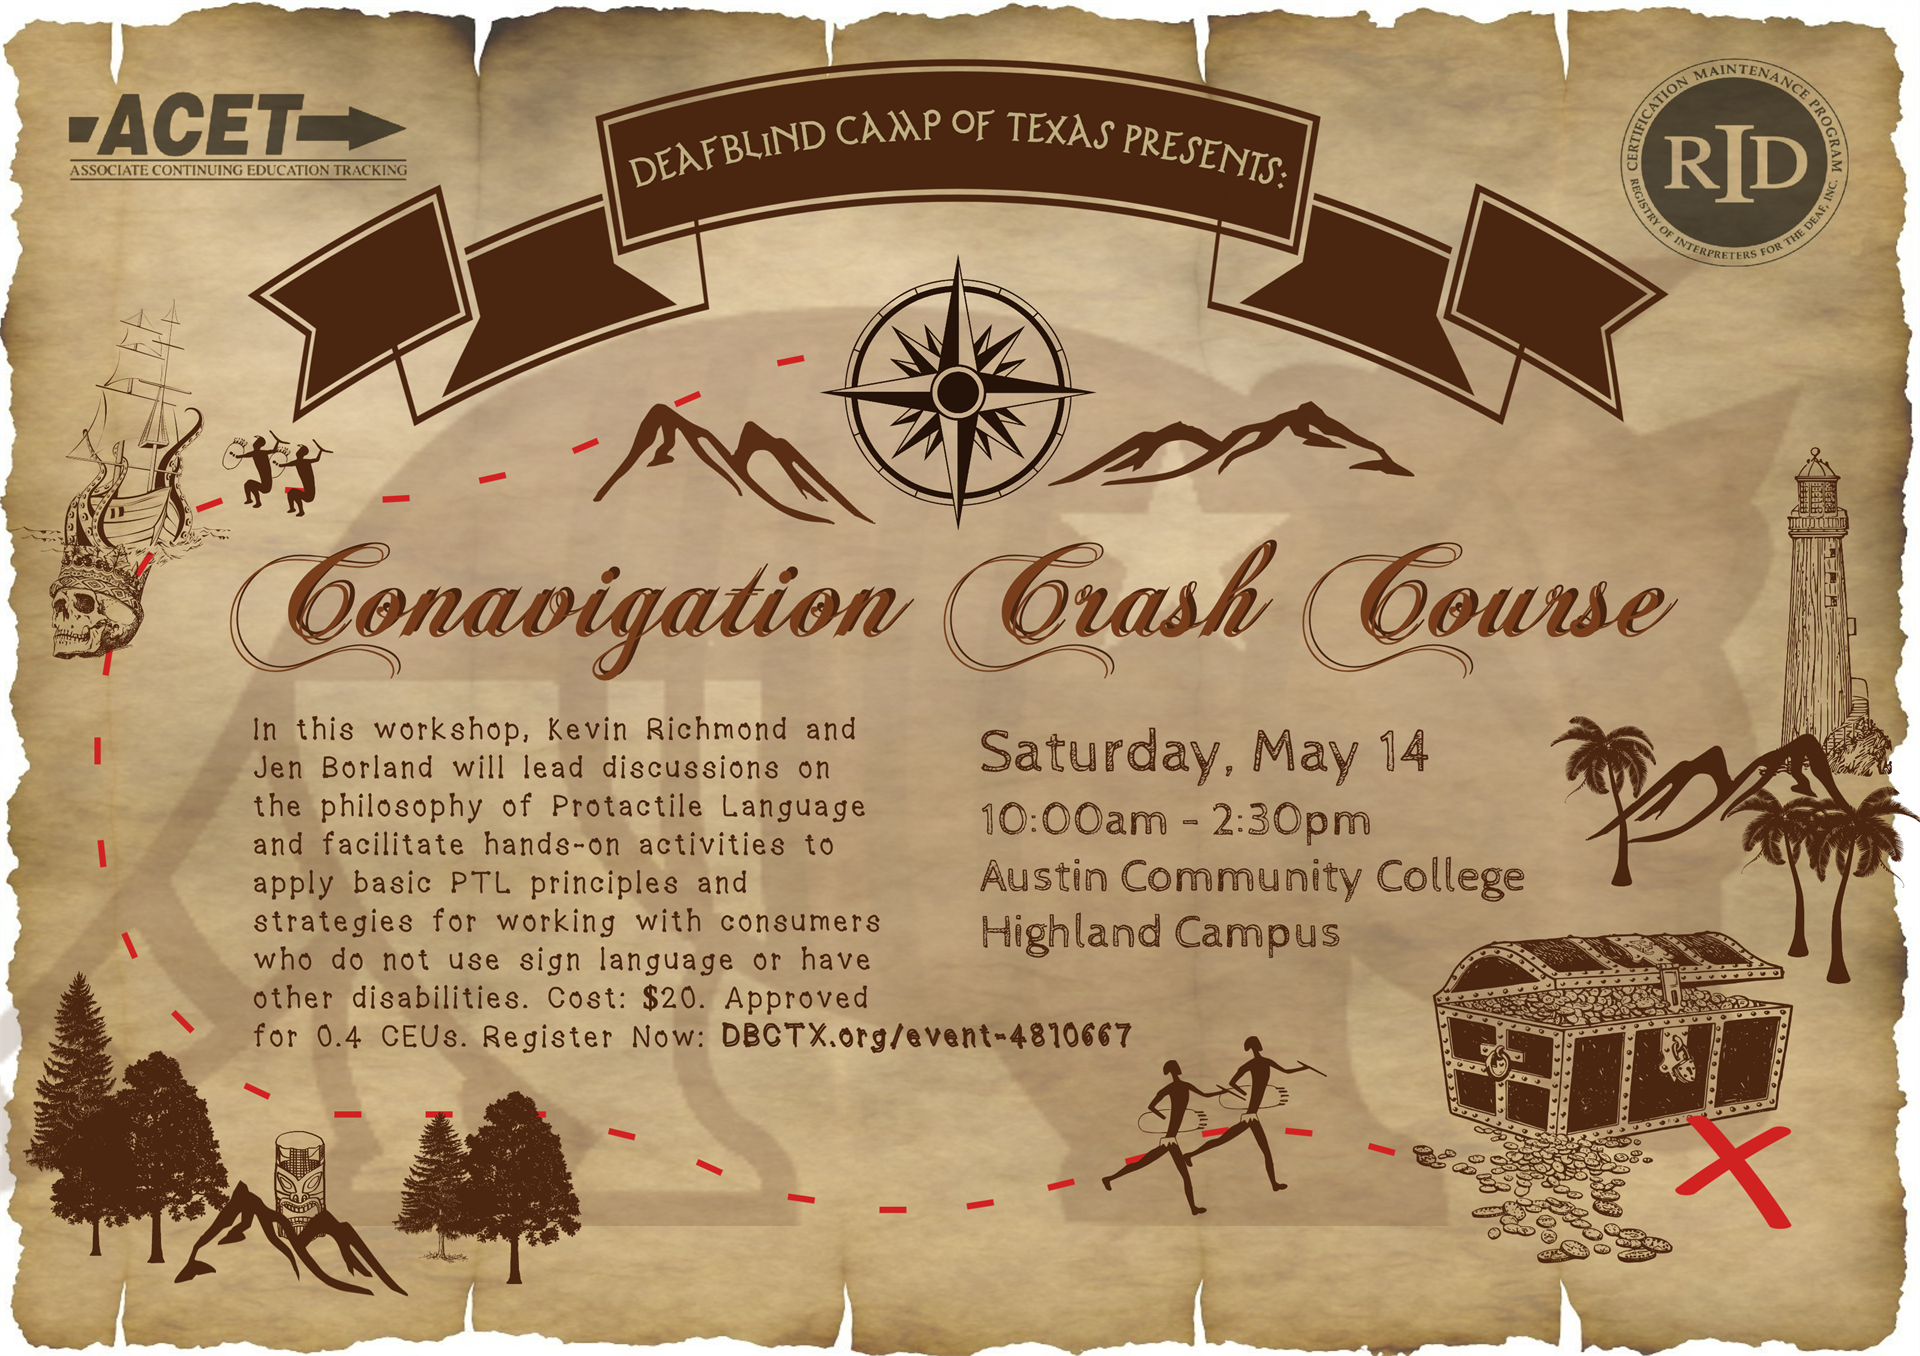 The DeafBlind Camp of Texas armadillo logo is faded into an ancient, worn treasure map. Banner: "DeafBlind Camp of Texas Presents:" A compass rose centers like the Sun between two distant mountain ranges. Title: "Conavigation Crash Course." A red, dotted line leads like a map-route from the compass rose to the left, where two people battle a giant octopus sinking an old fashioned multisail ship. Beneath it, a skull wears a crown. The path continues down to the bottom-left of the page, where it crosses a mountain forest featuring a mysterious tiki totem. The path continues to the bottom-right corner of the page, where two people march together toward a lighthouse on a paradise island, encountering a giant, overflowing treasure chest, marked on the map by a large red X. Text: "In this workshop, Kevin Richmond and Jen Borland will lead discussions on the philosophy of Protactile Language and facilitate hands-on activities to apply basic PTL principles and strategies for working with consumers who do not use sign language or have other disabilities. Cost: $20. Approved for 0.4 CEUs. Register Now: DBCTX.org/event-4810667." Text: "Saturday, May 14. 10:00am - 2:30pm. Austin Community College Highland Campus." At top corners, logos: "Registry of Interpreters for the Deaf (RID) Certificate Maintenance Program; Associate Continuing Education Tracking (ACET).